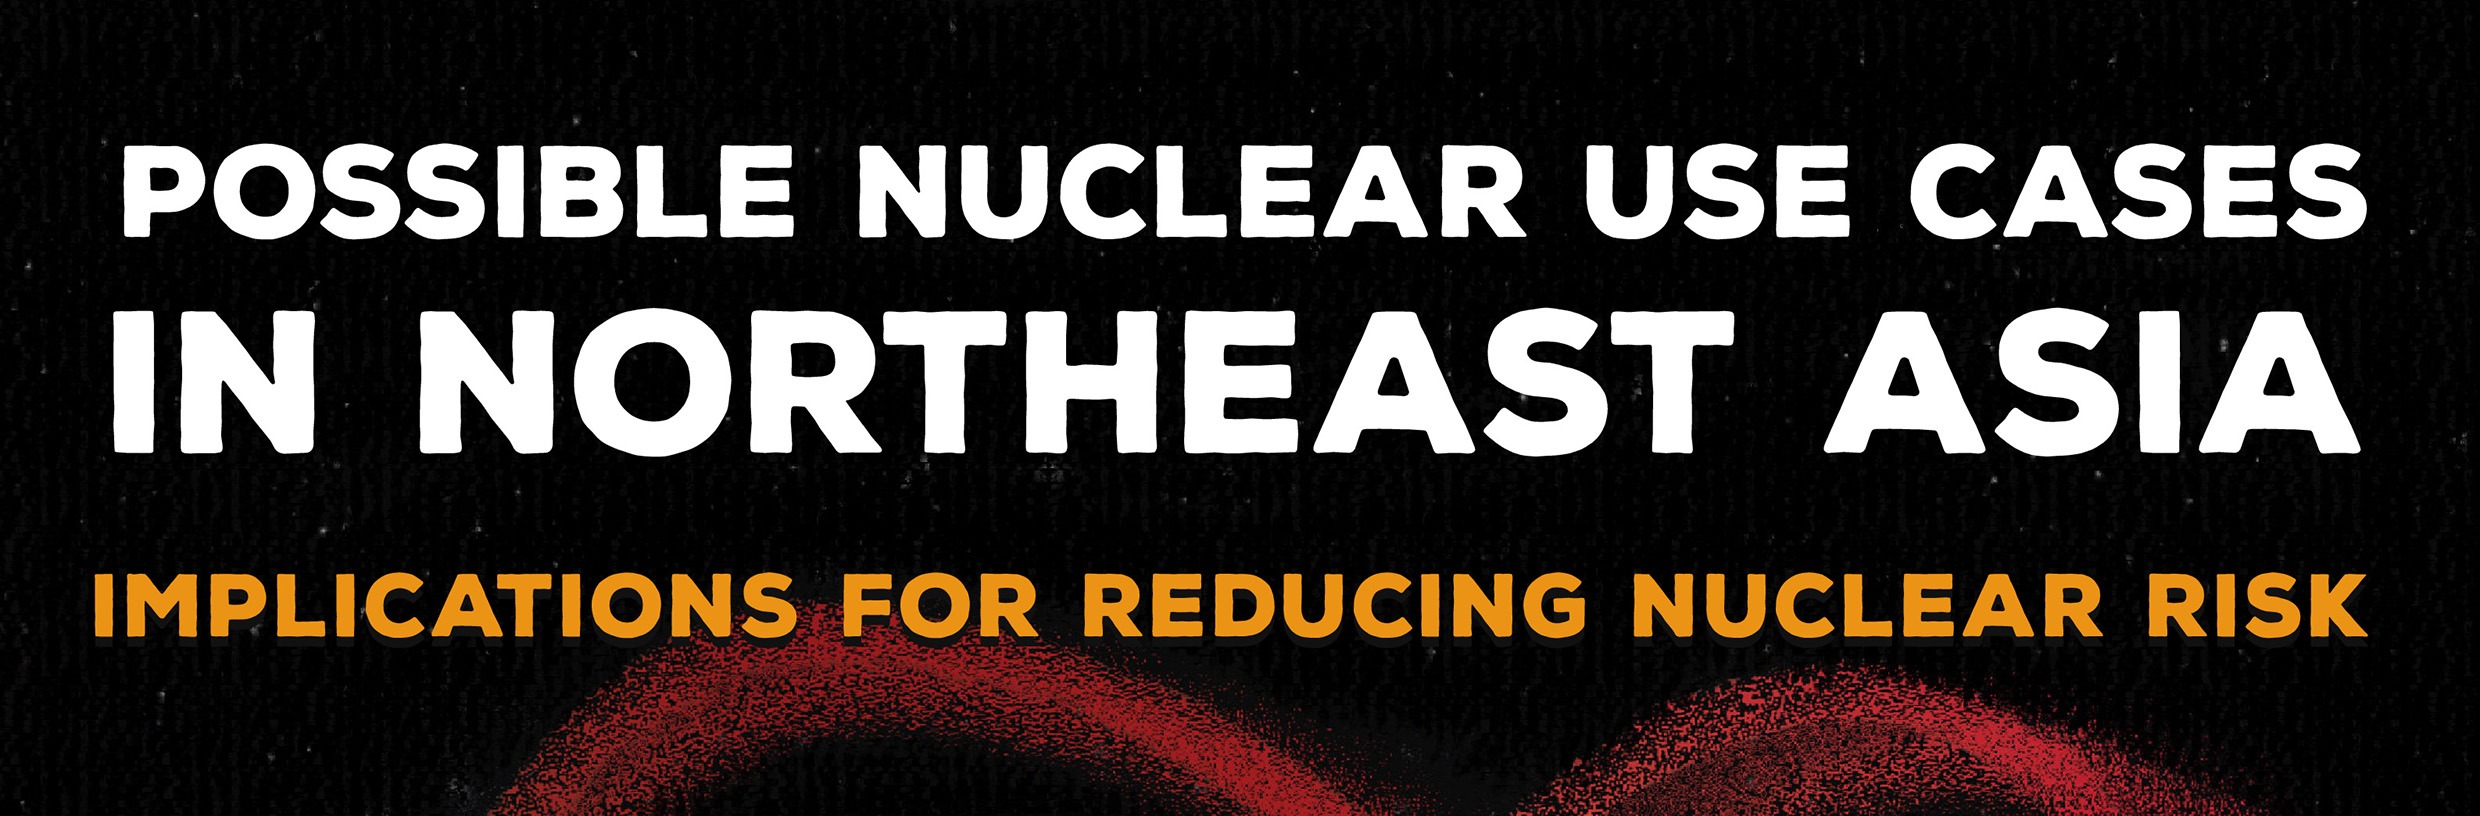 Possible Nuclear Use Cases in Northeast Asia: Implications for Reducing Nuclear Risk